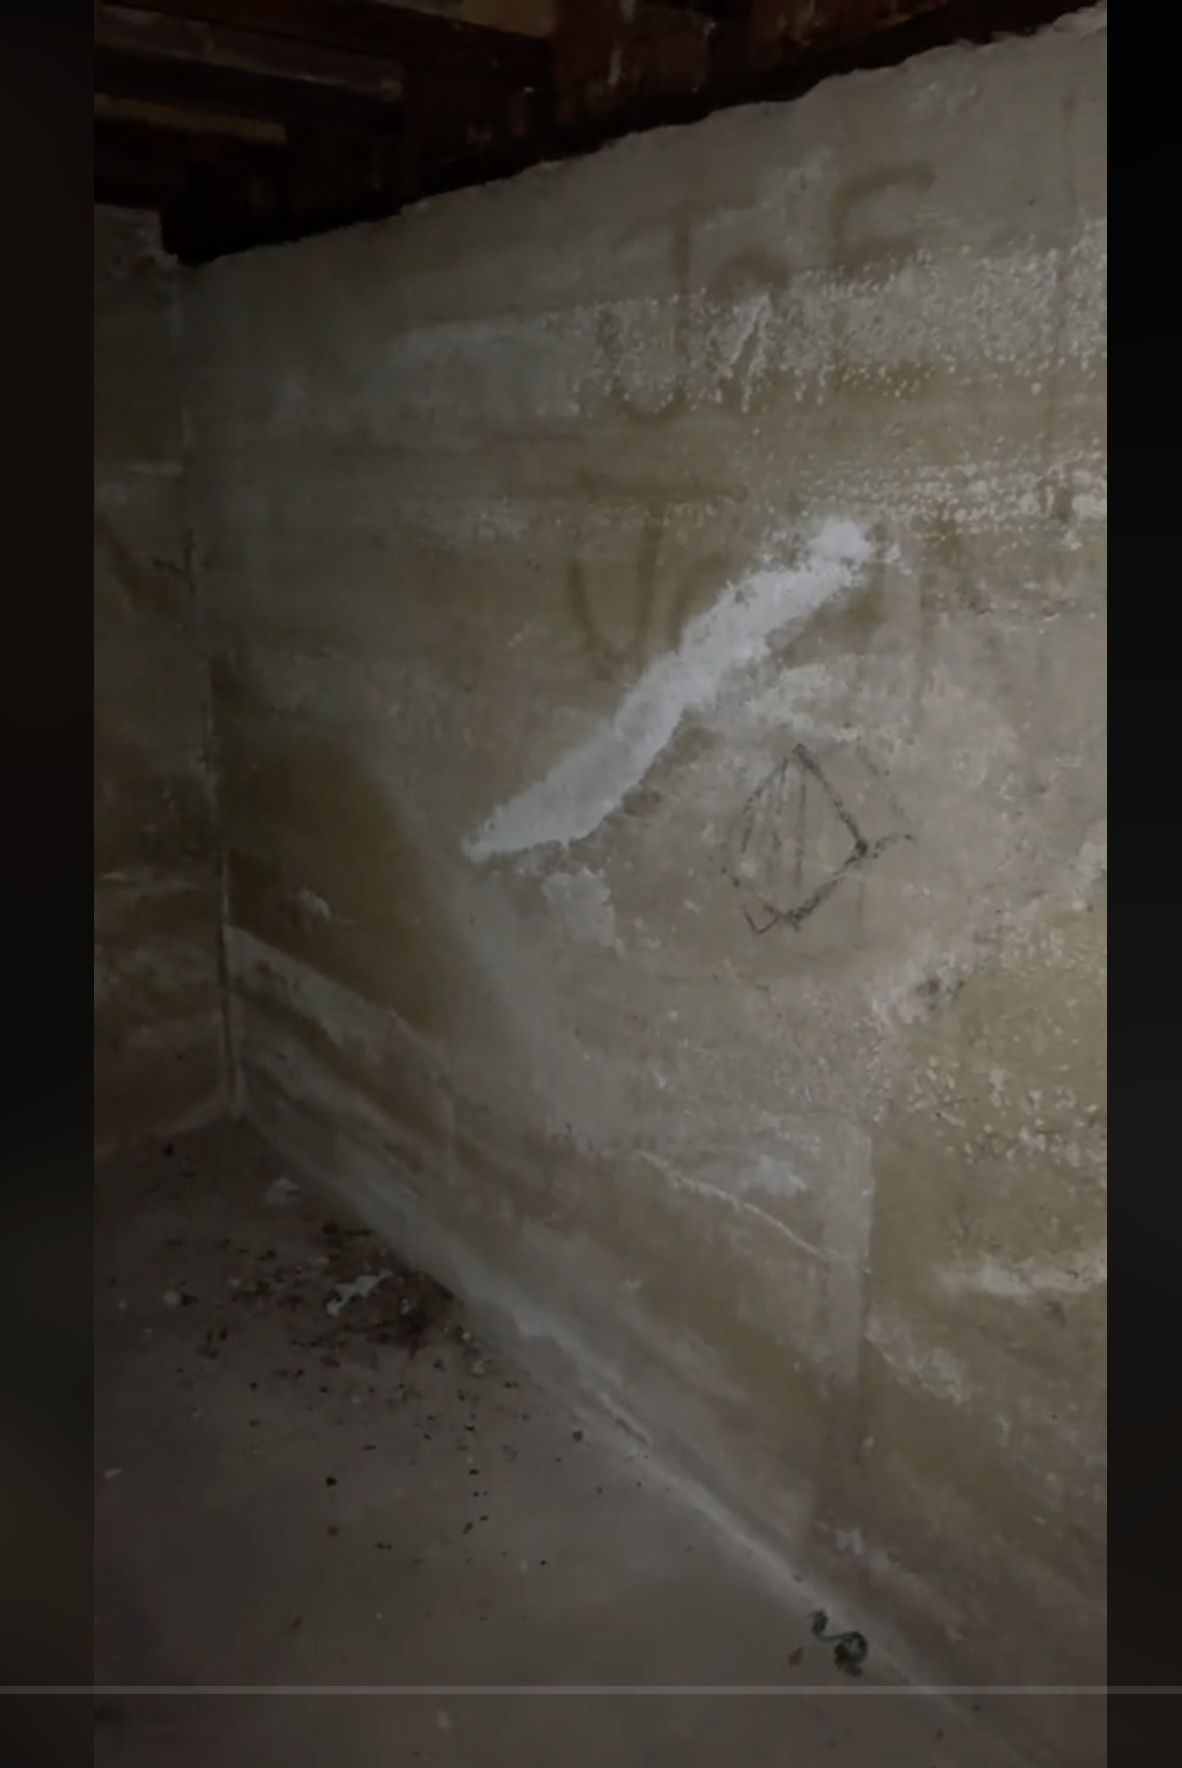 Julia Henning found two names spray-painted on the wall with a creepy symbol underneath, as seen in a video dated June 15, 2023 | Source: tiktok.com/@iamjuliahenning